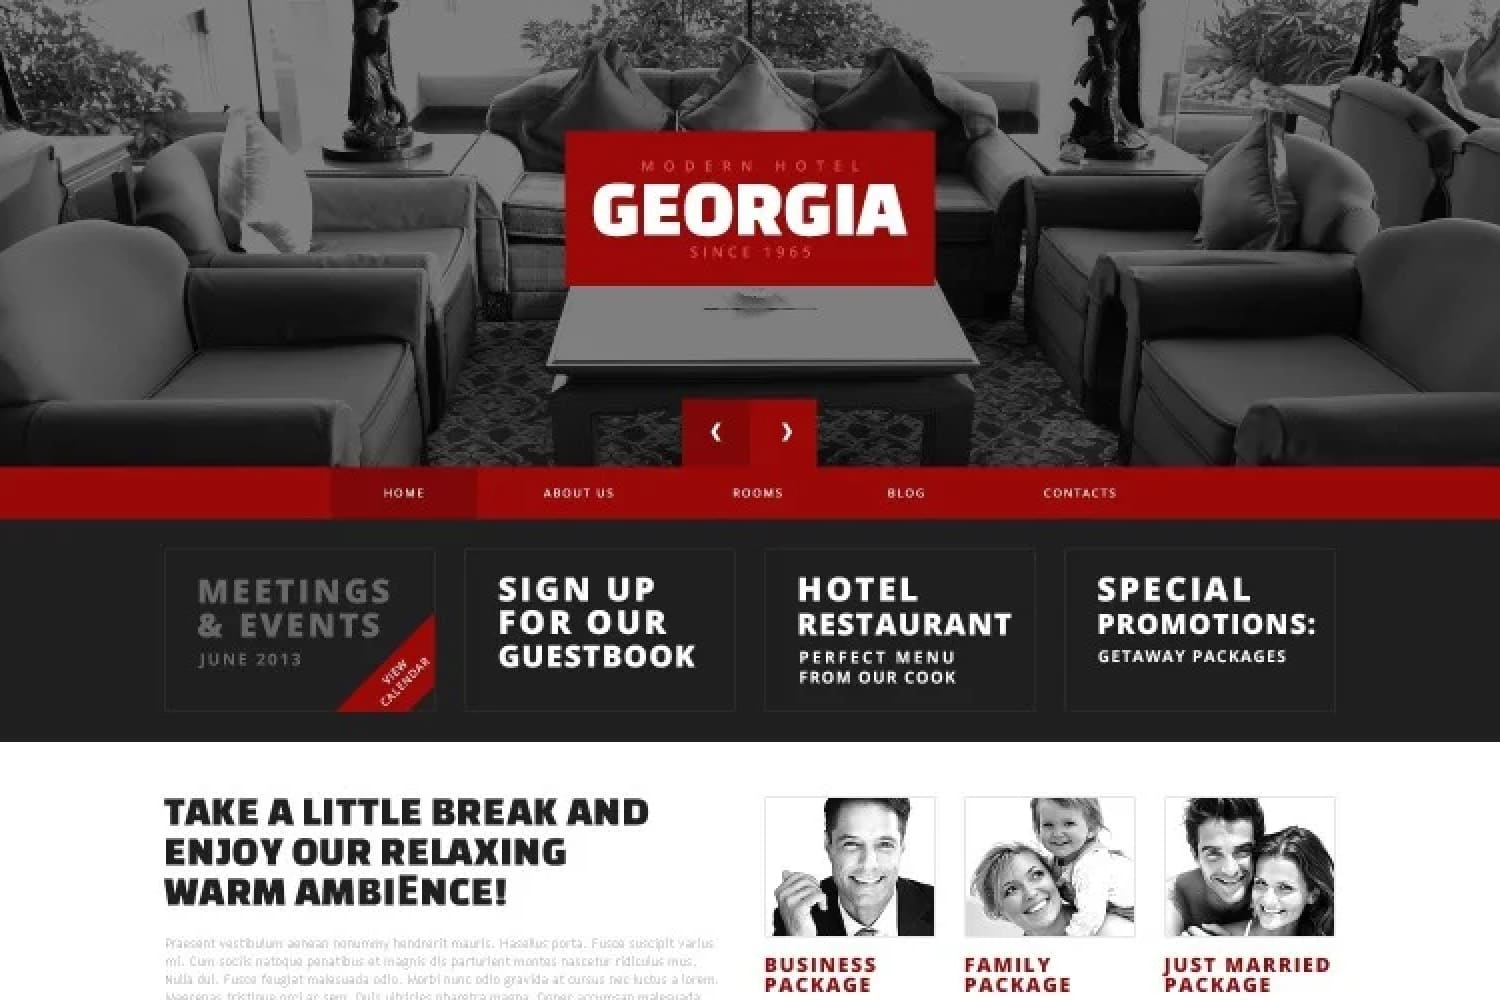 Hotel website homepage with lobby photo and black and red color scheme.